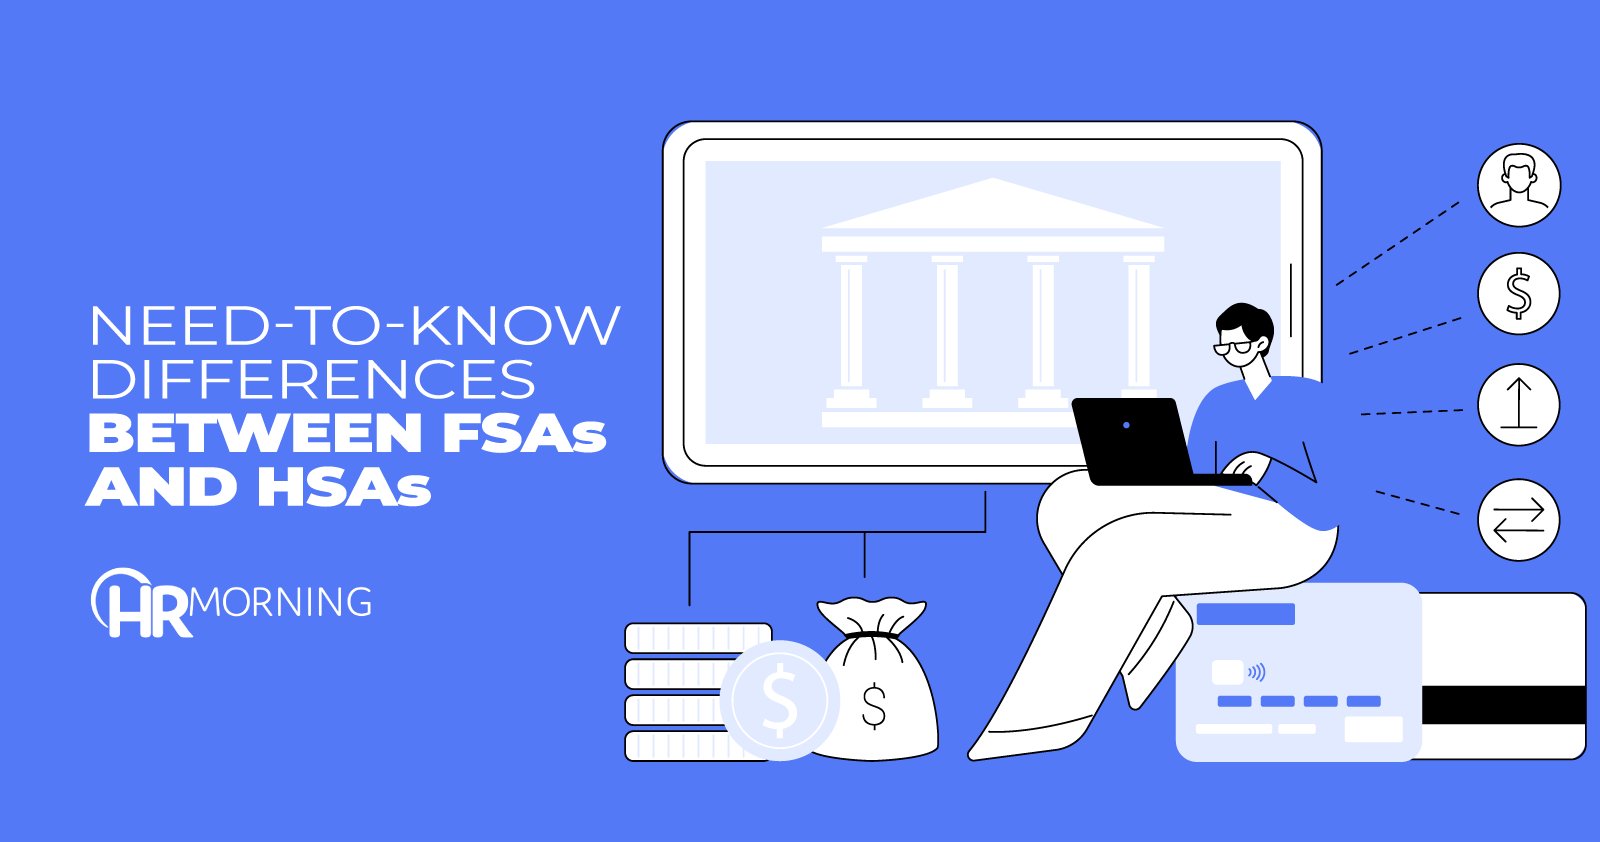 Need-to-know differences between FSAs and HSAs